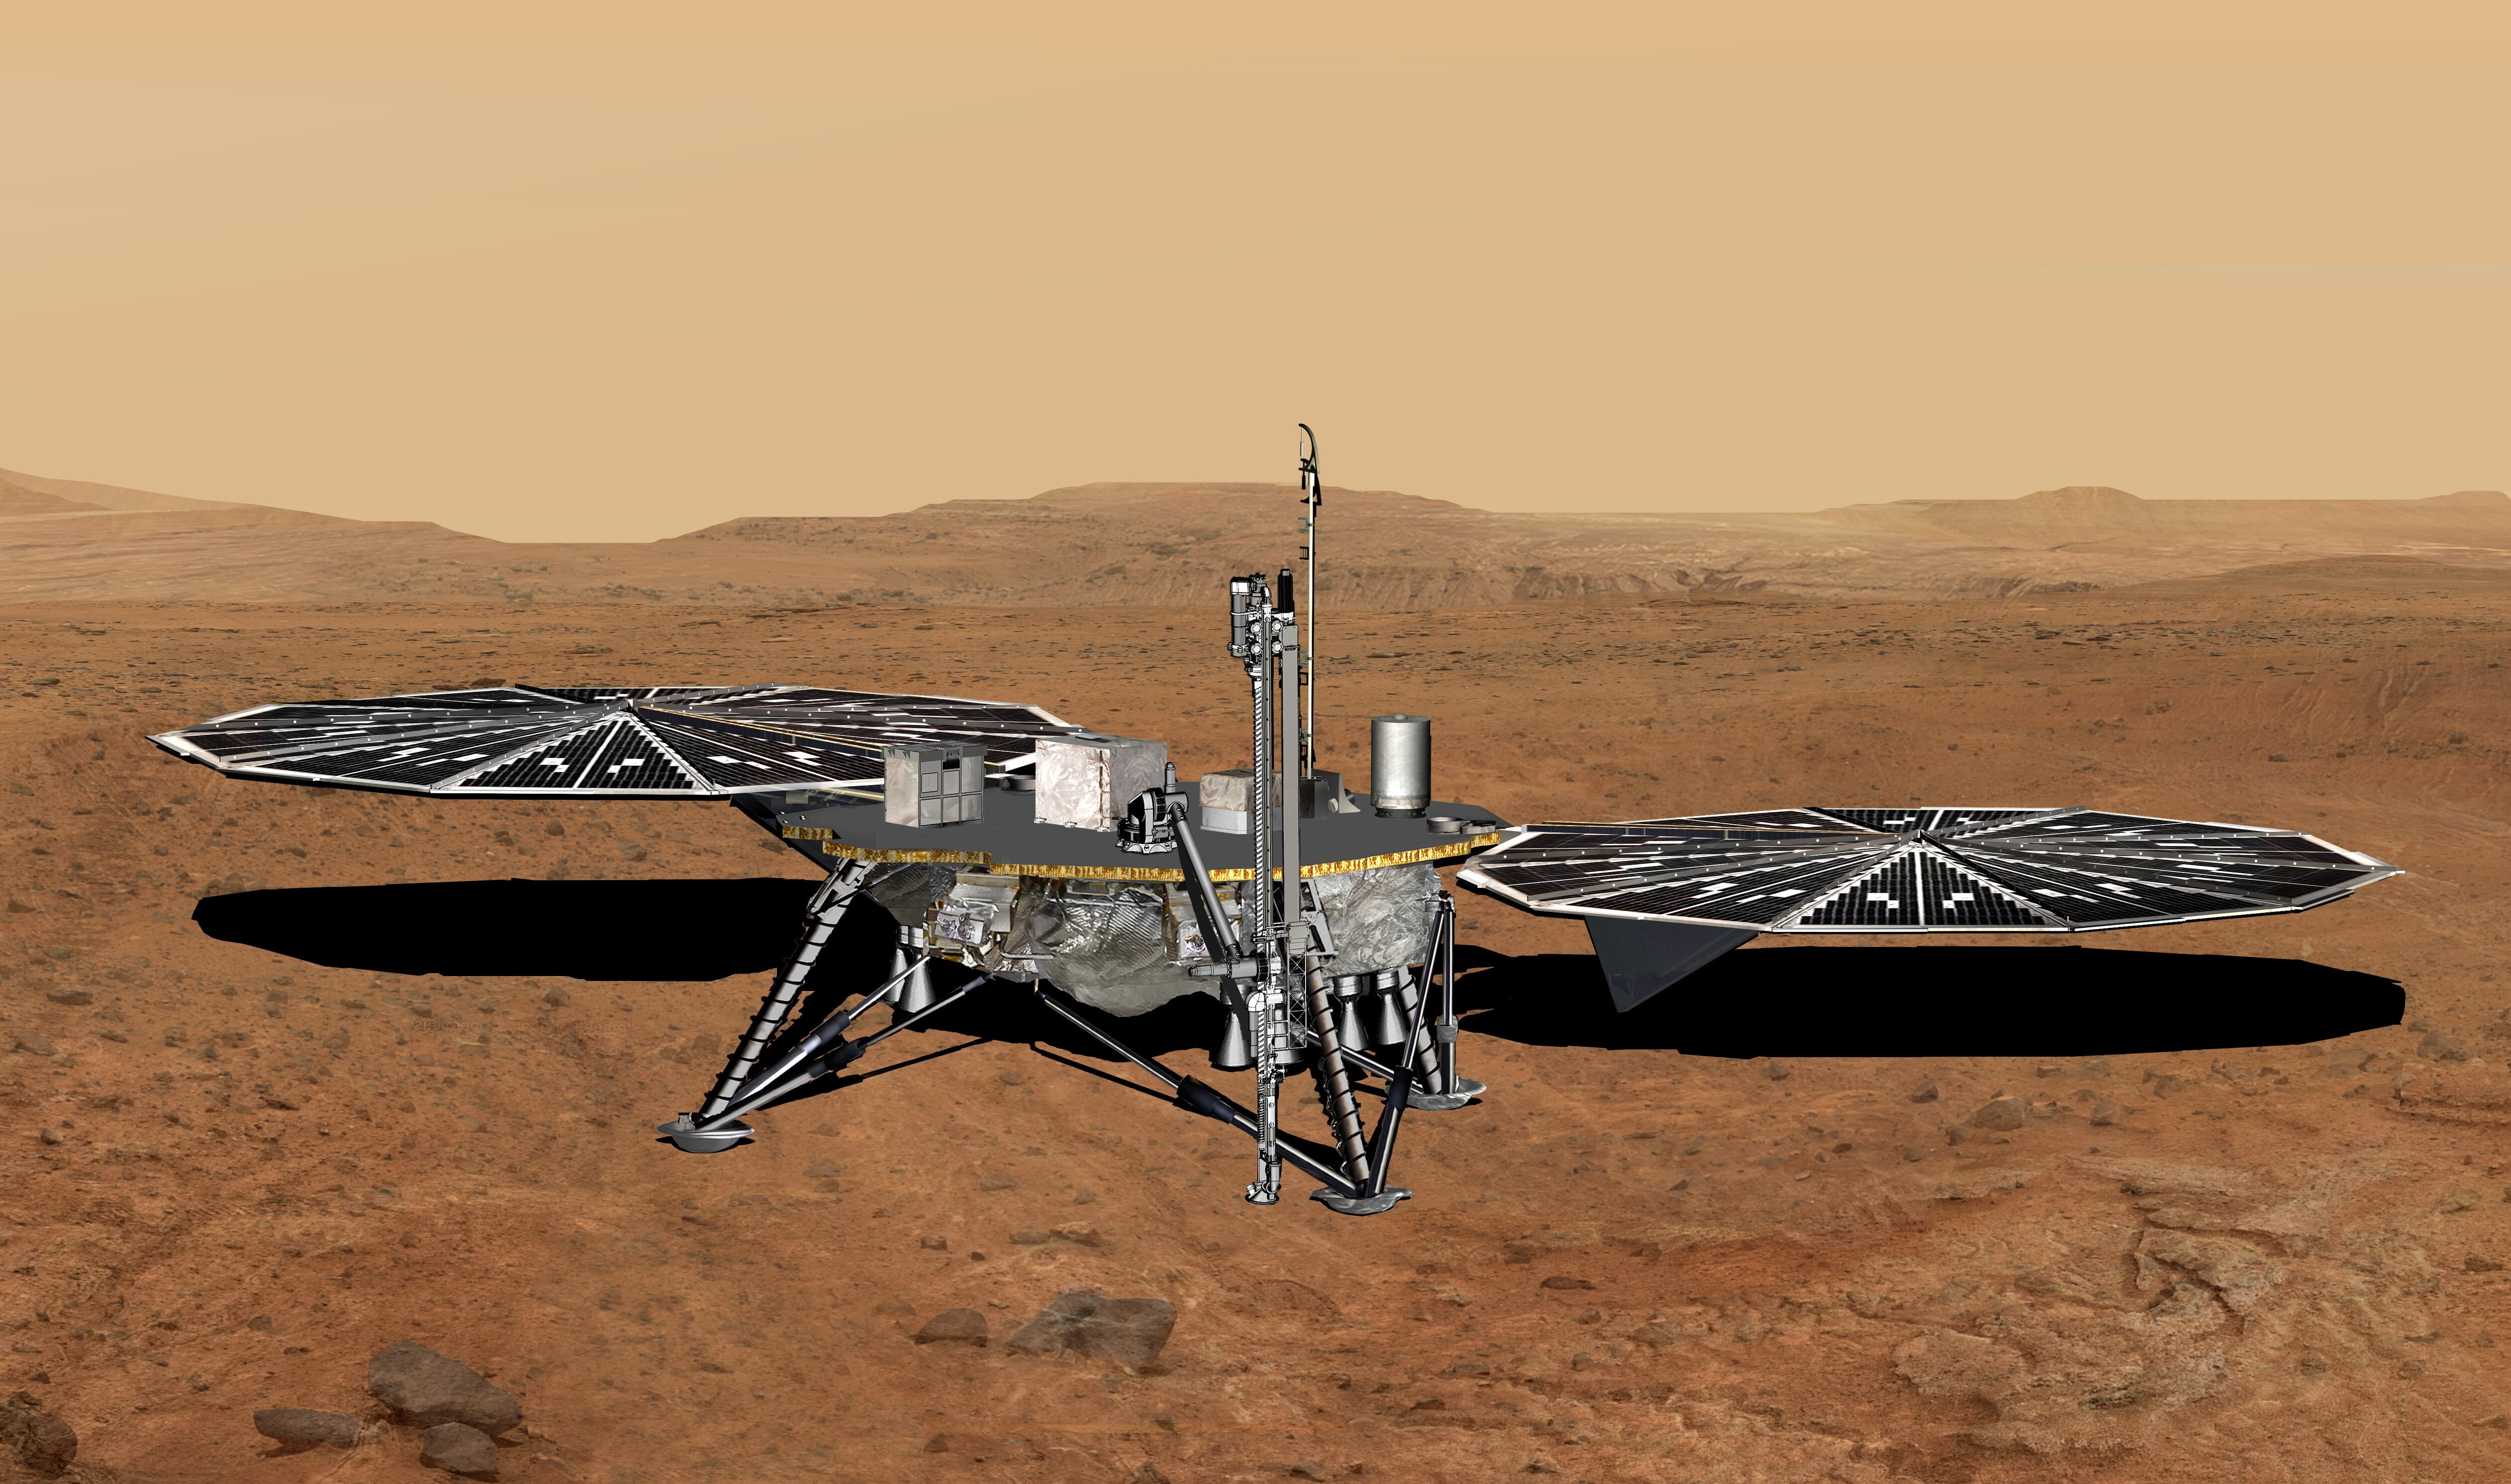 A squat lander with four legs and two large solar panels on the surface of a reddish-orange desert planet